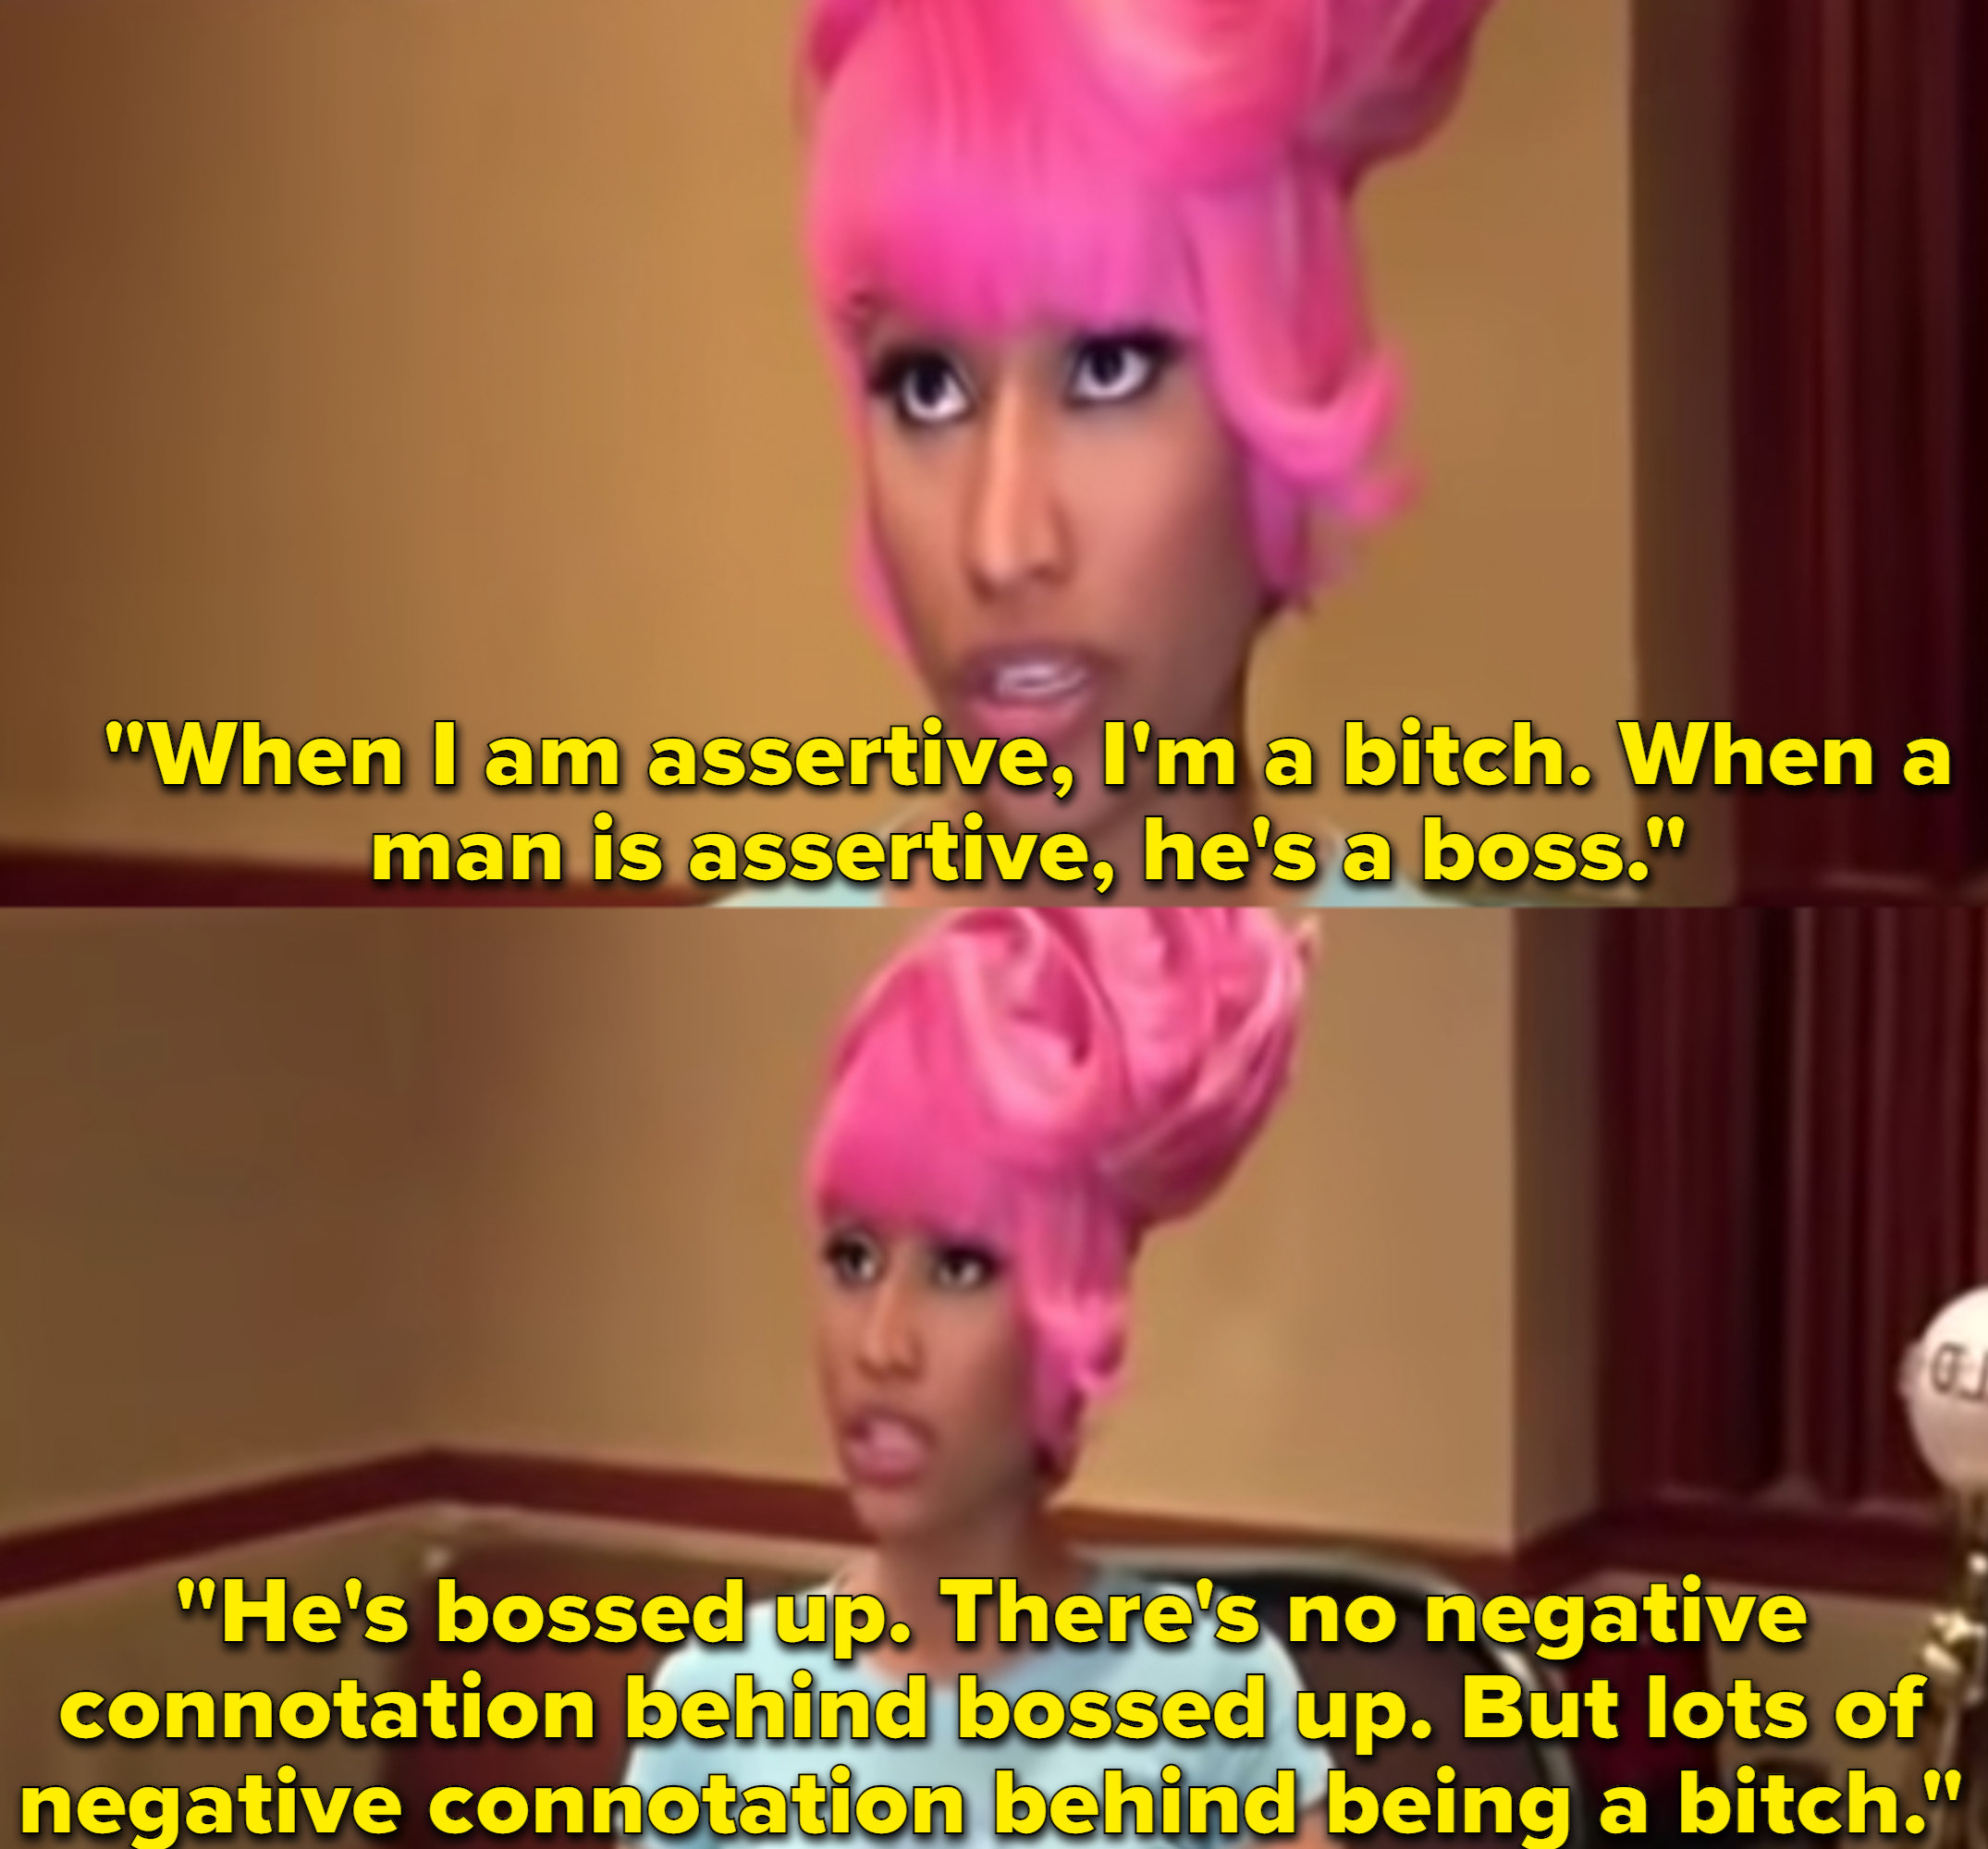 Nicki Minaj describes the difference between men and women when it comes to power, explaining there&#x27;s nothing negative about a man being a &quot;boss,&quot; but, if a woman is &quot;bitch,&quot; it&#x27;s nothing but negative. 